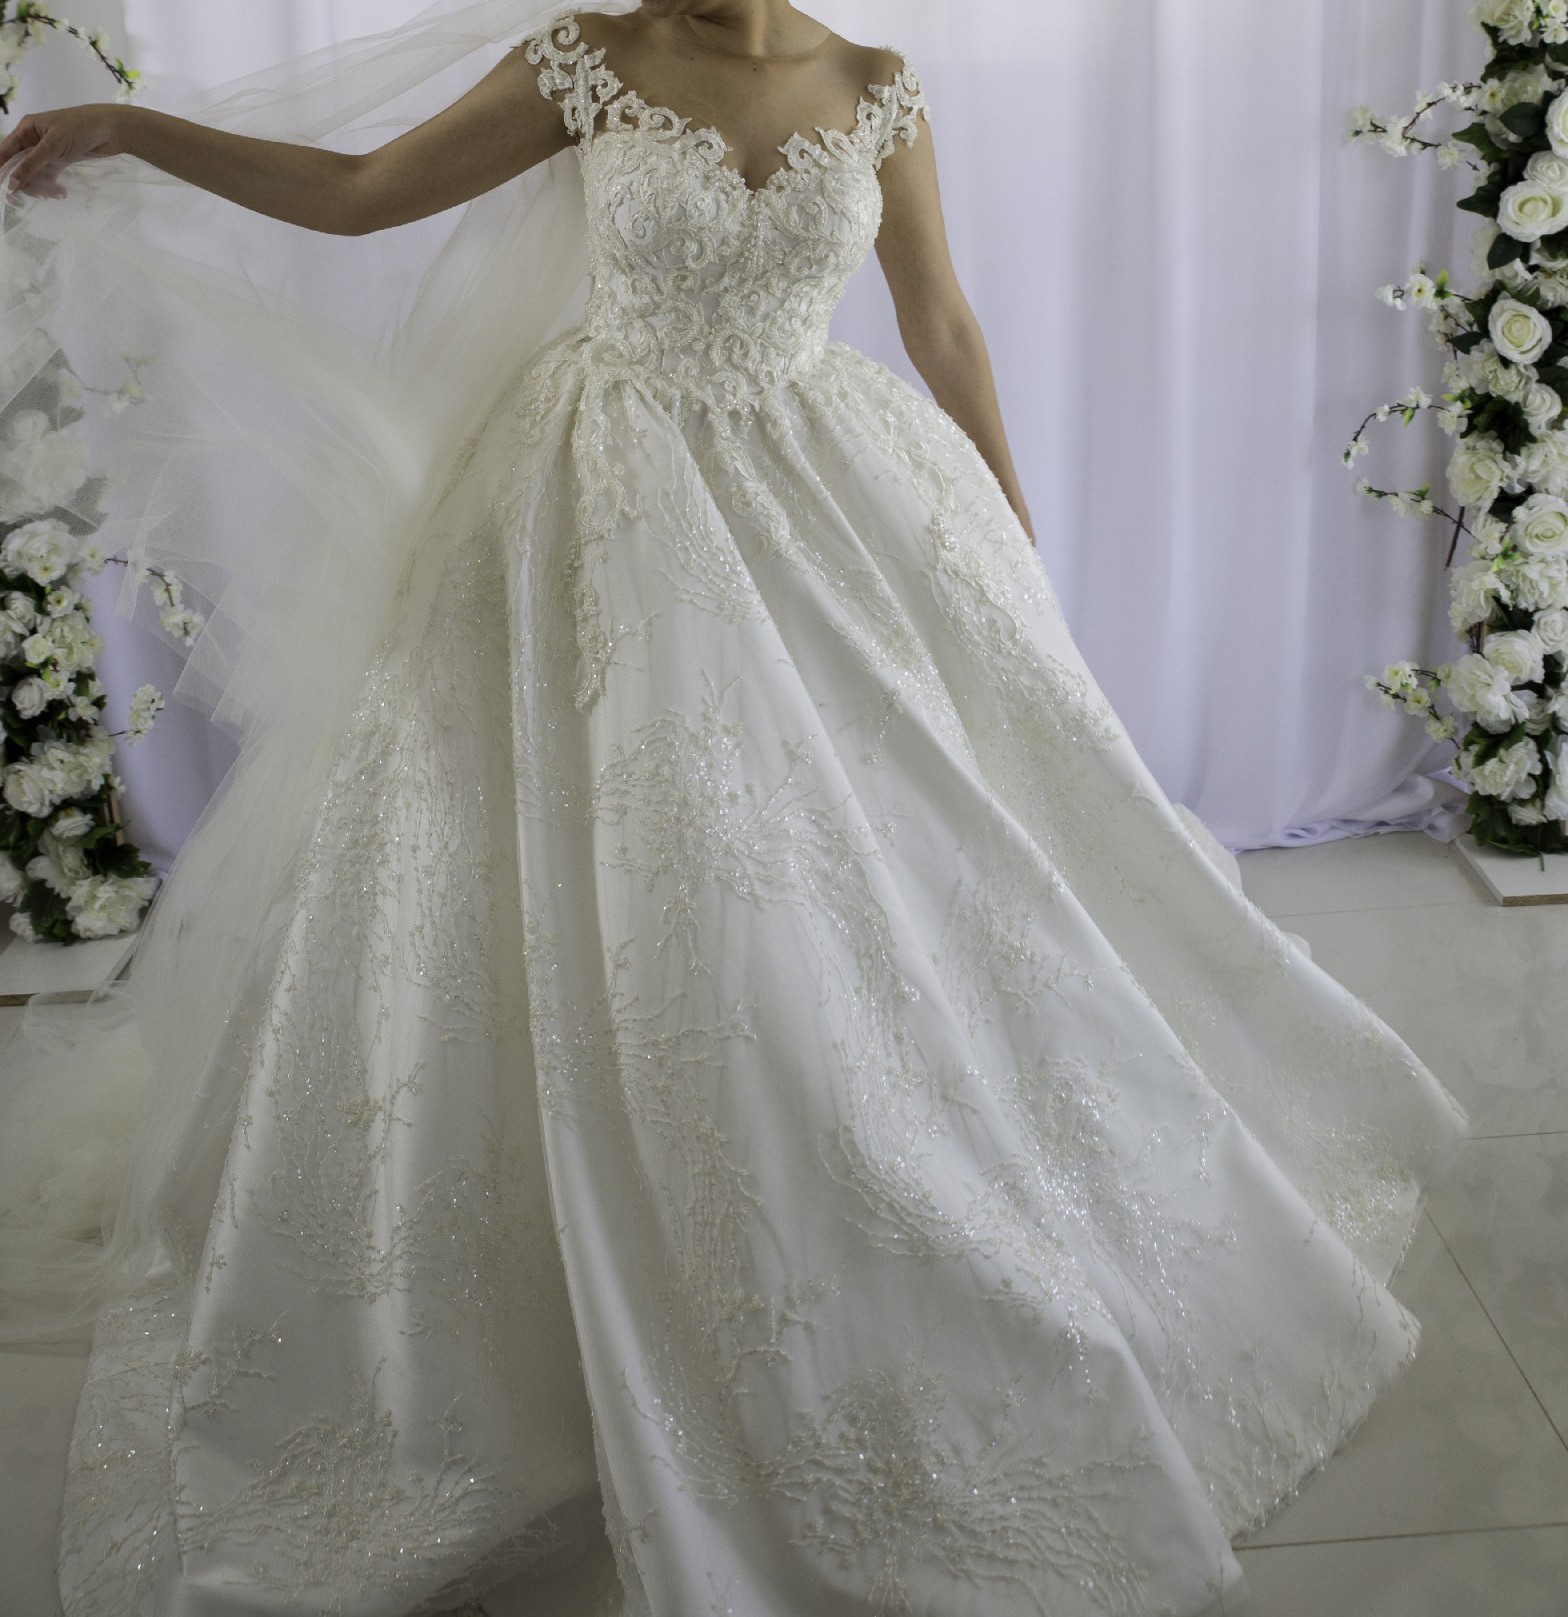 Norma And Lili Bridal Couture Custom Made Used Wedding Dress Save 62% ...